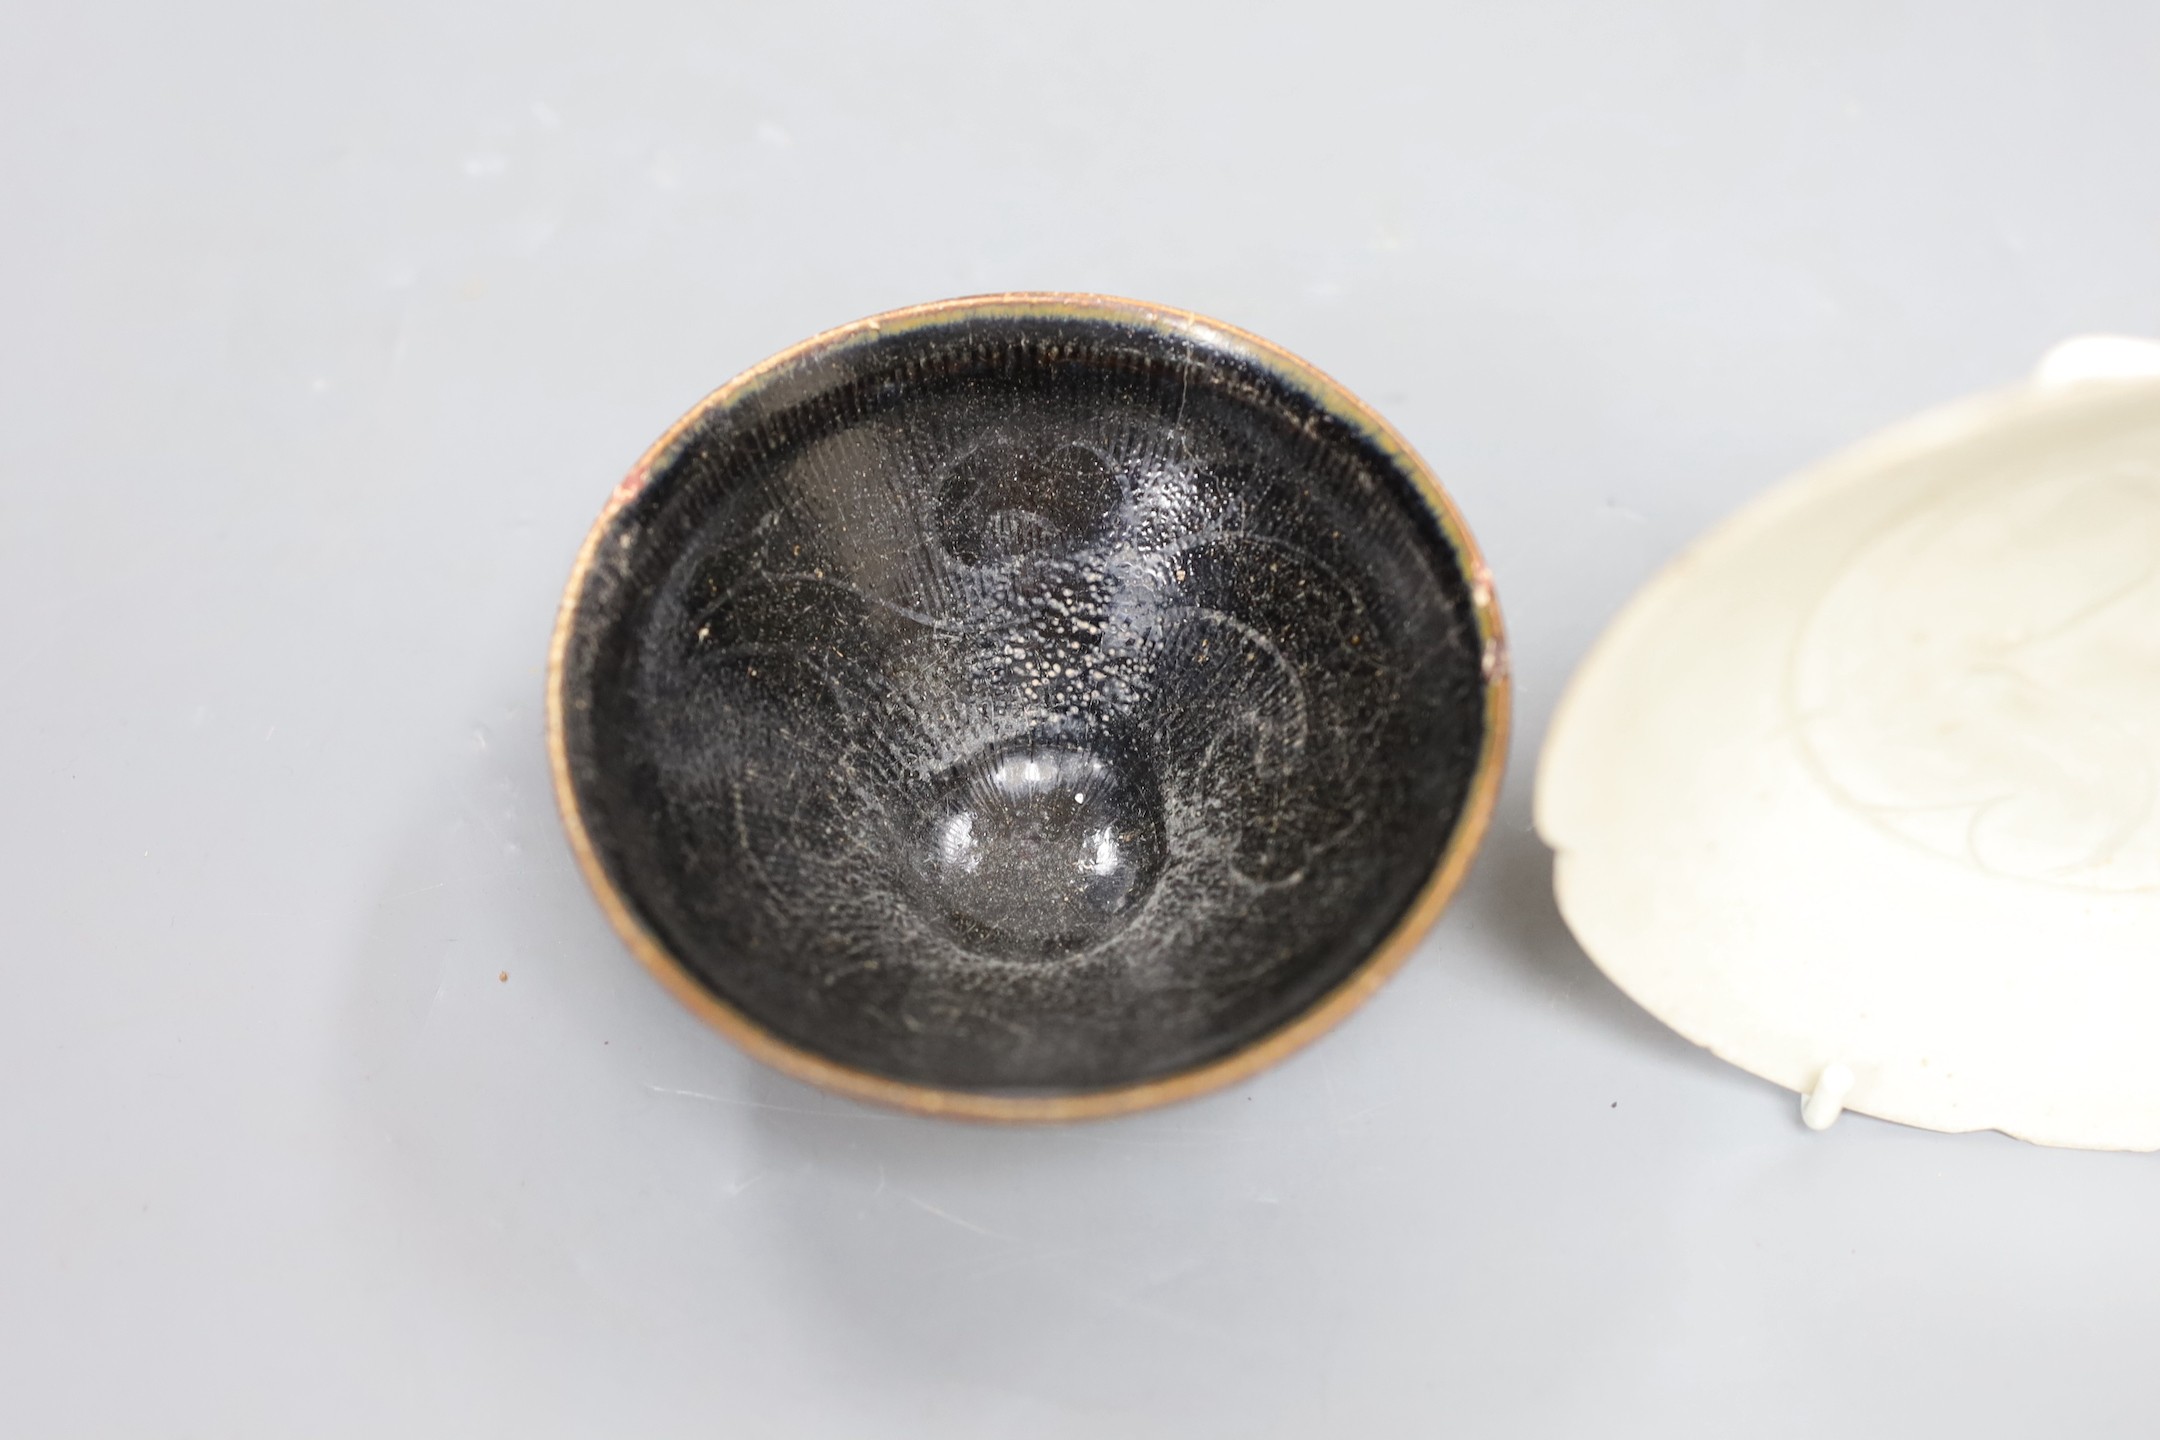 A Chinese Jizhou ‘scrolling leaf’ bowl, Song Dynasty, 11cm and a carved qingbai dish, 14cm